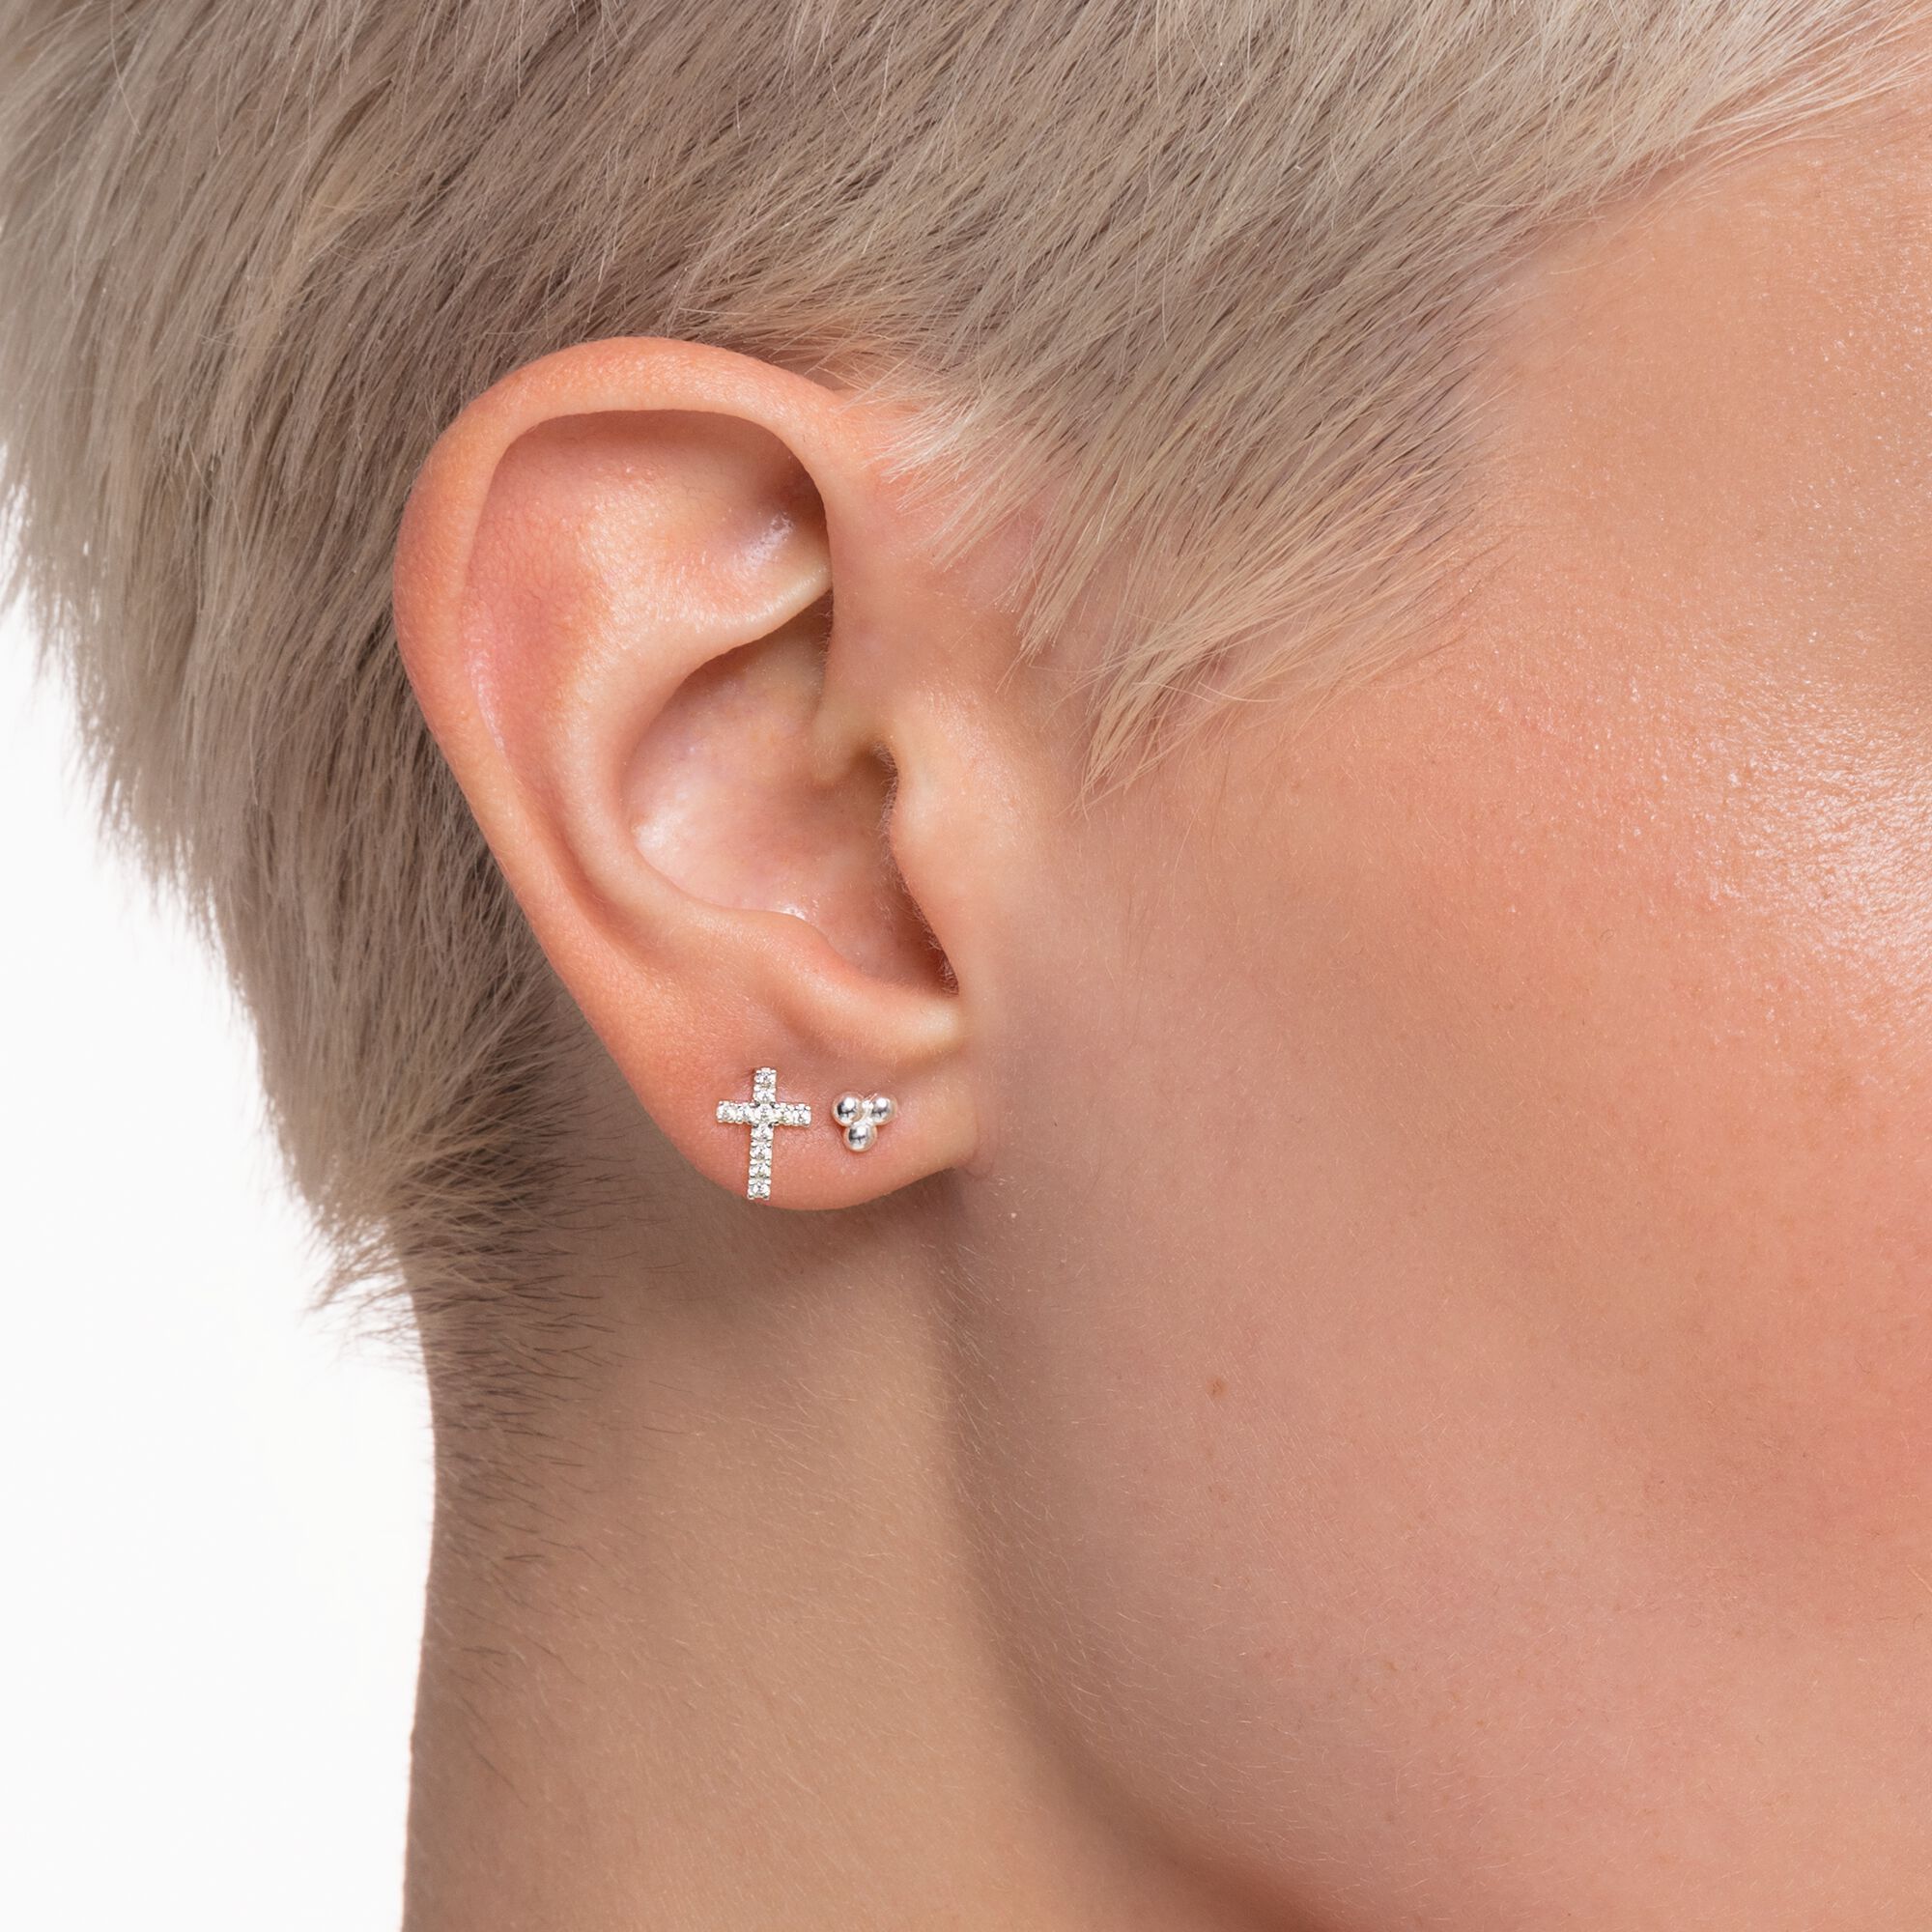 Ear stud in bubbles THOMAS Small geometrical silver: SABO │